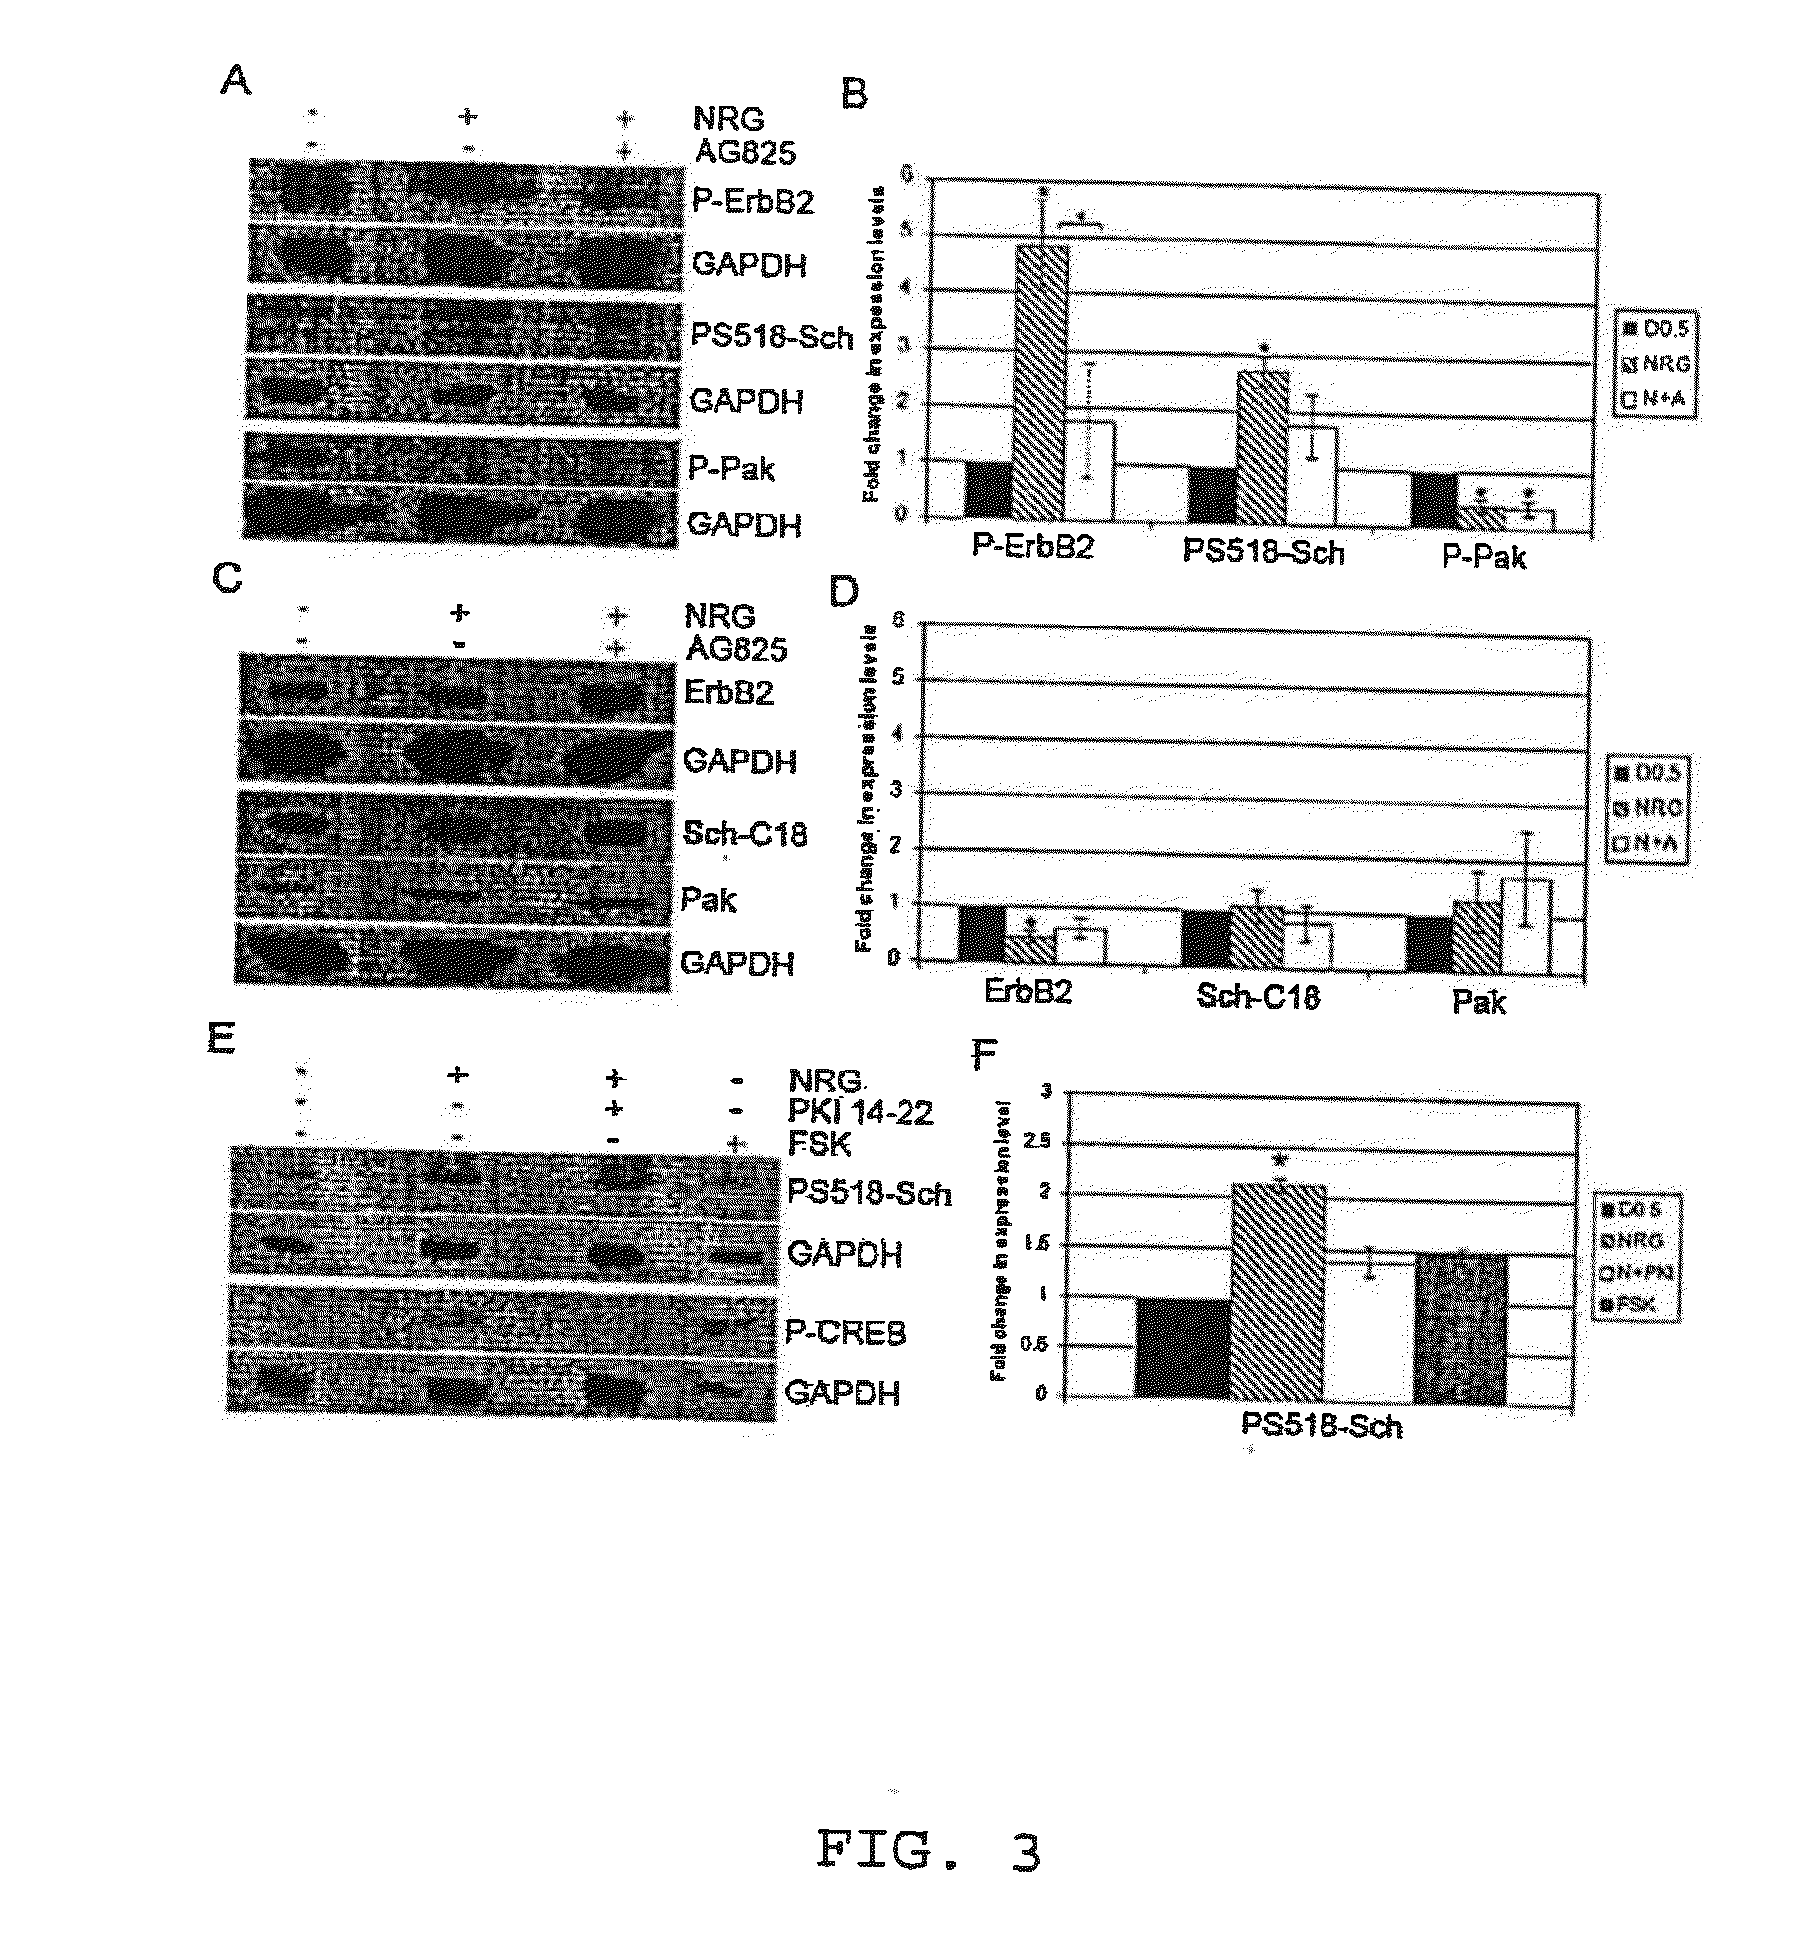 Methods of inducing and preventing neurofibromatosis in schwann cells